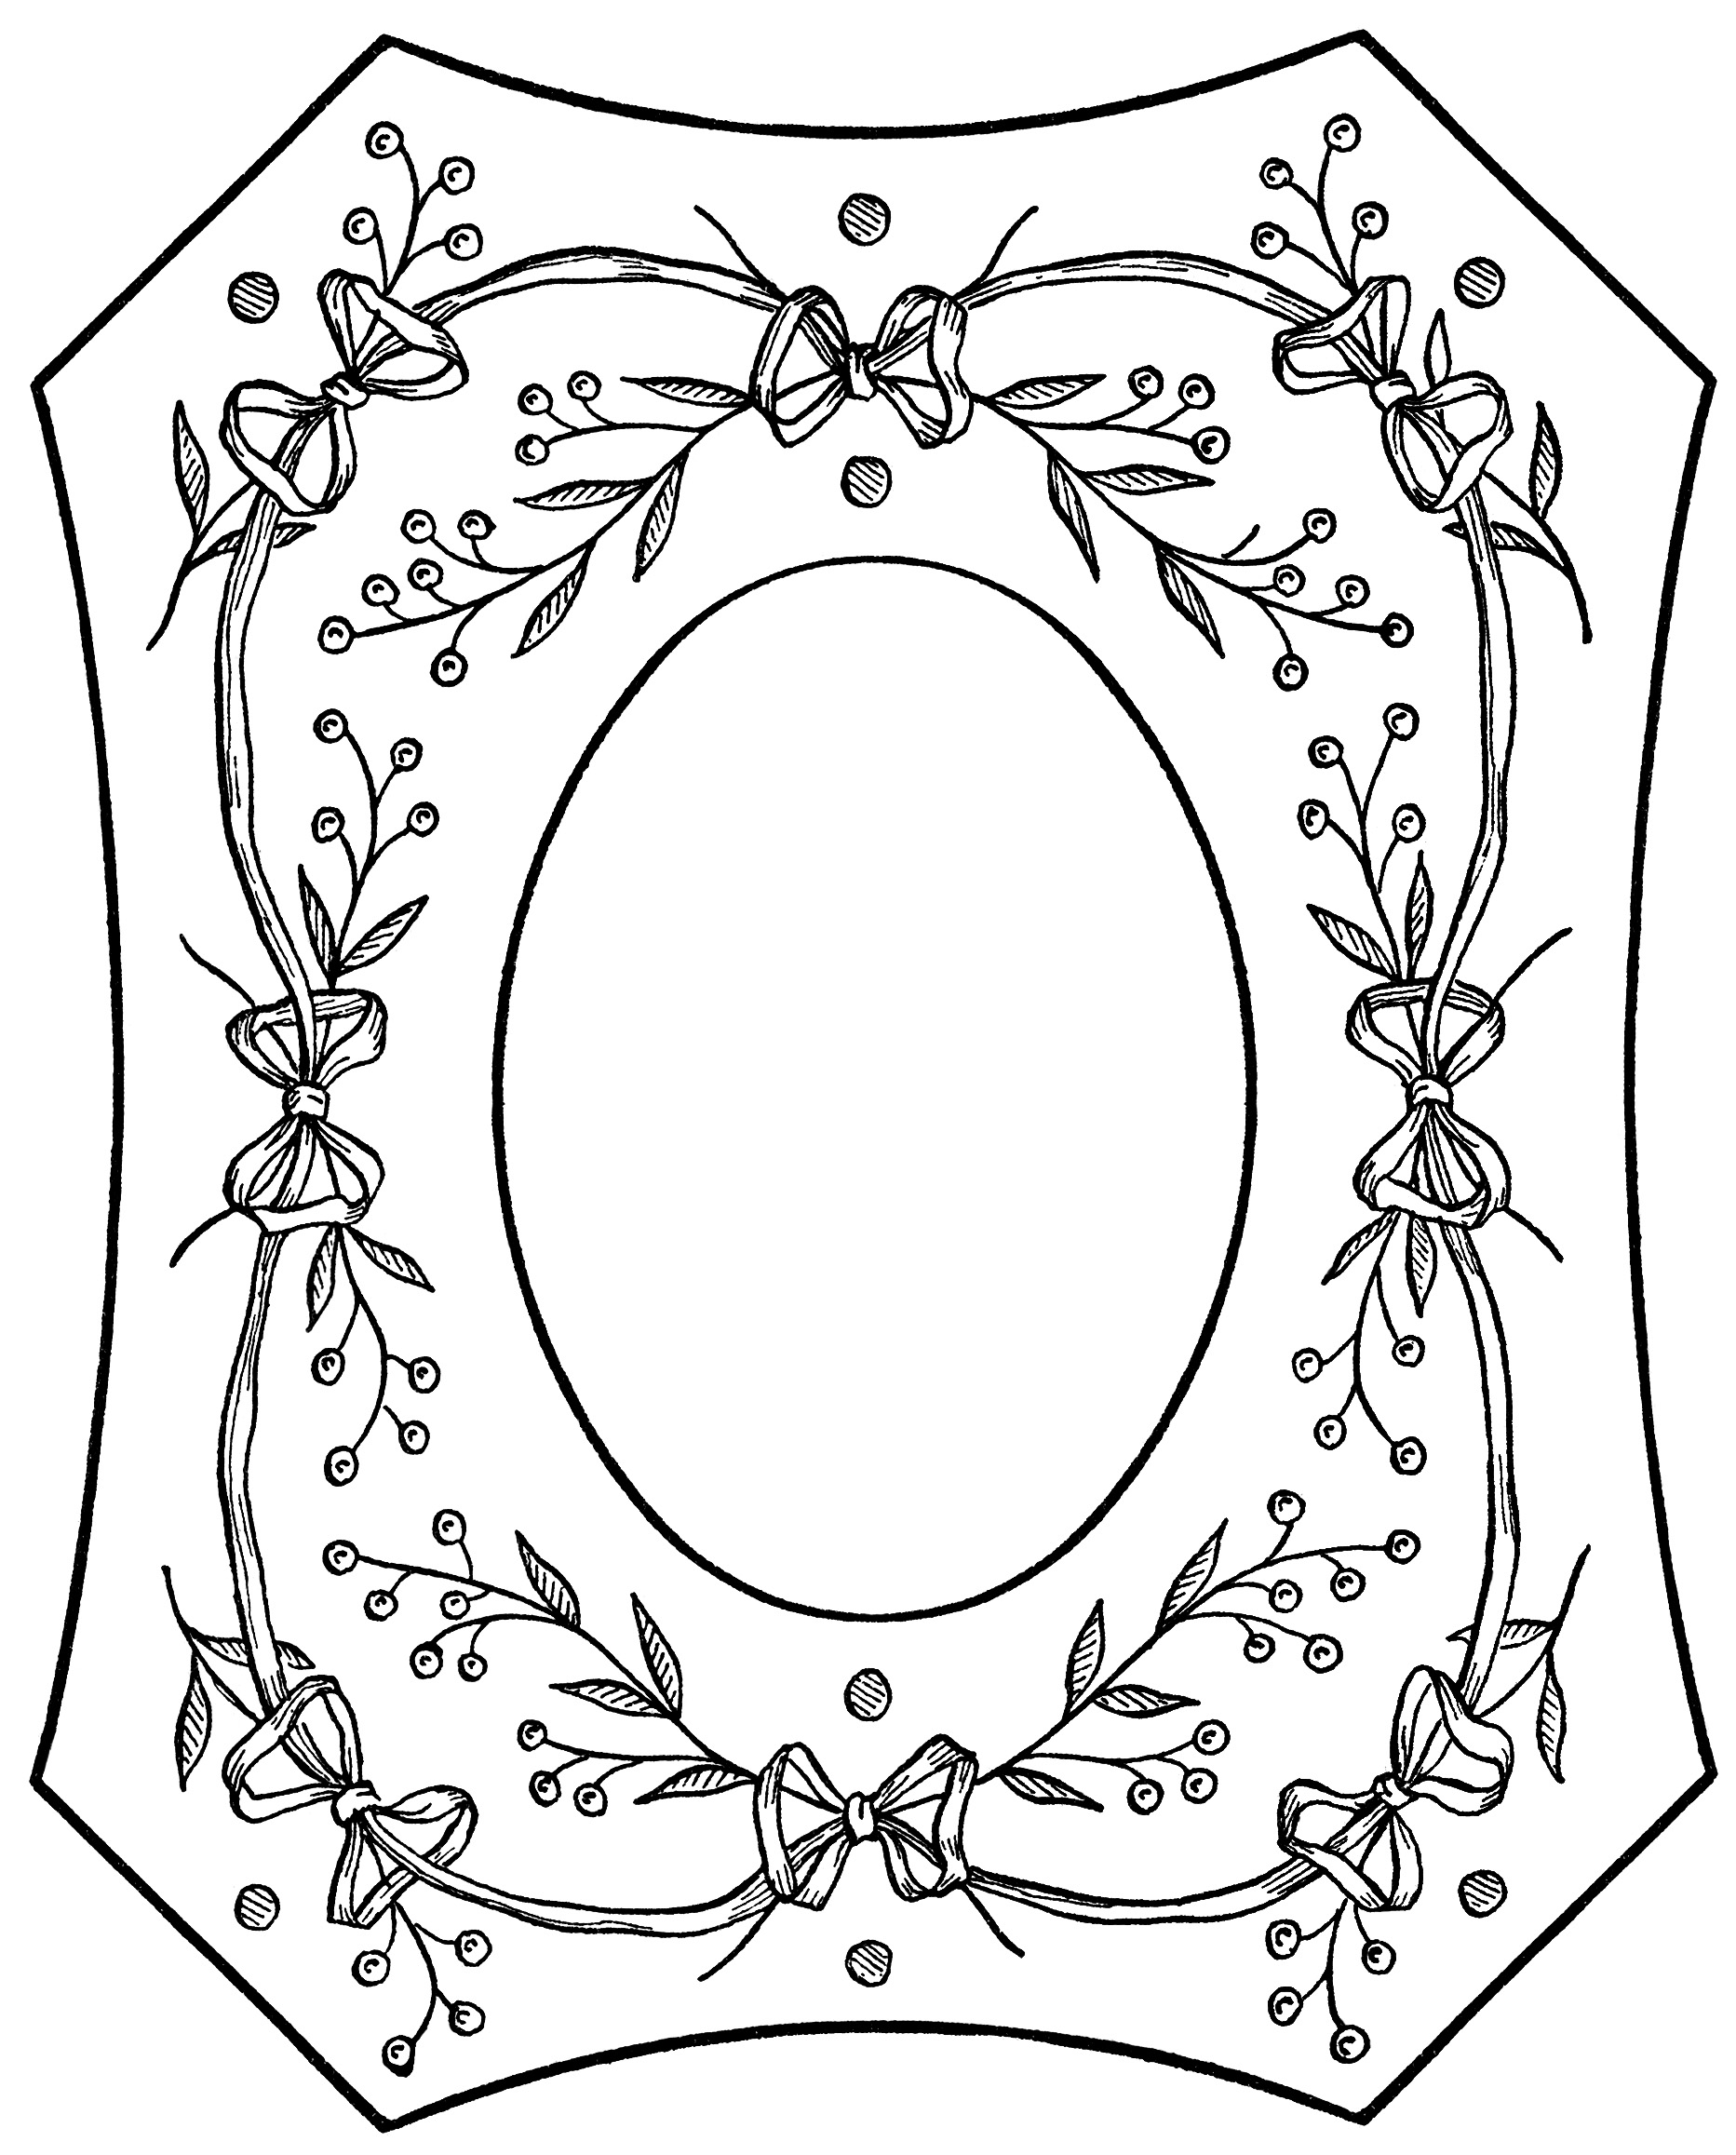 vintage embroidery pattern, Victorian clip art frame, black and white graphics, printable photo frame, ornate vintage graphics, berries and bows design